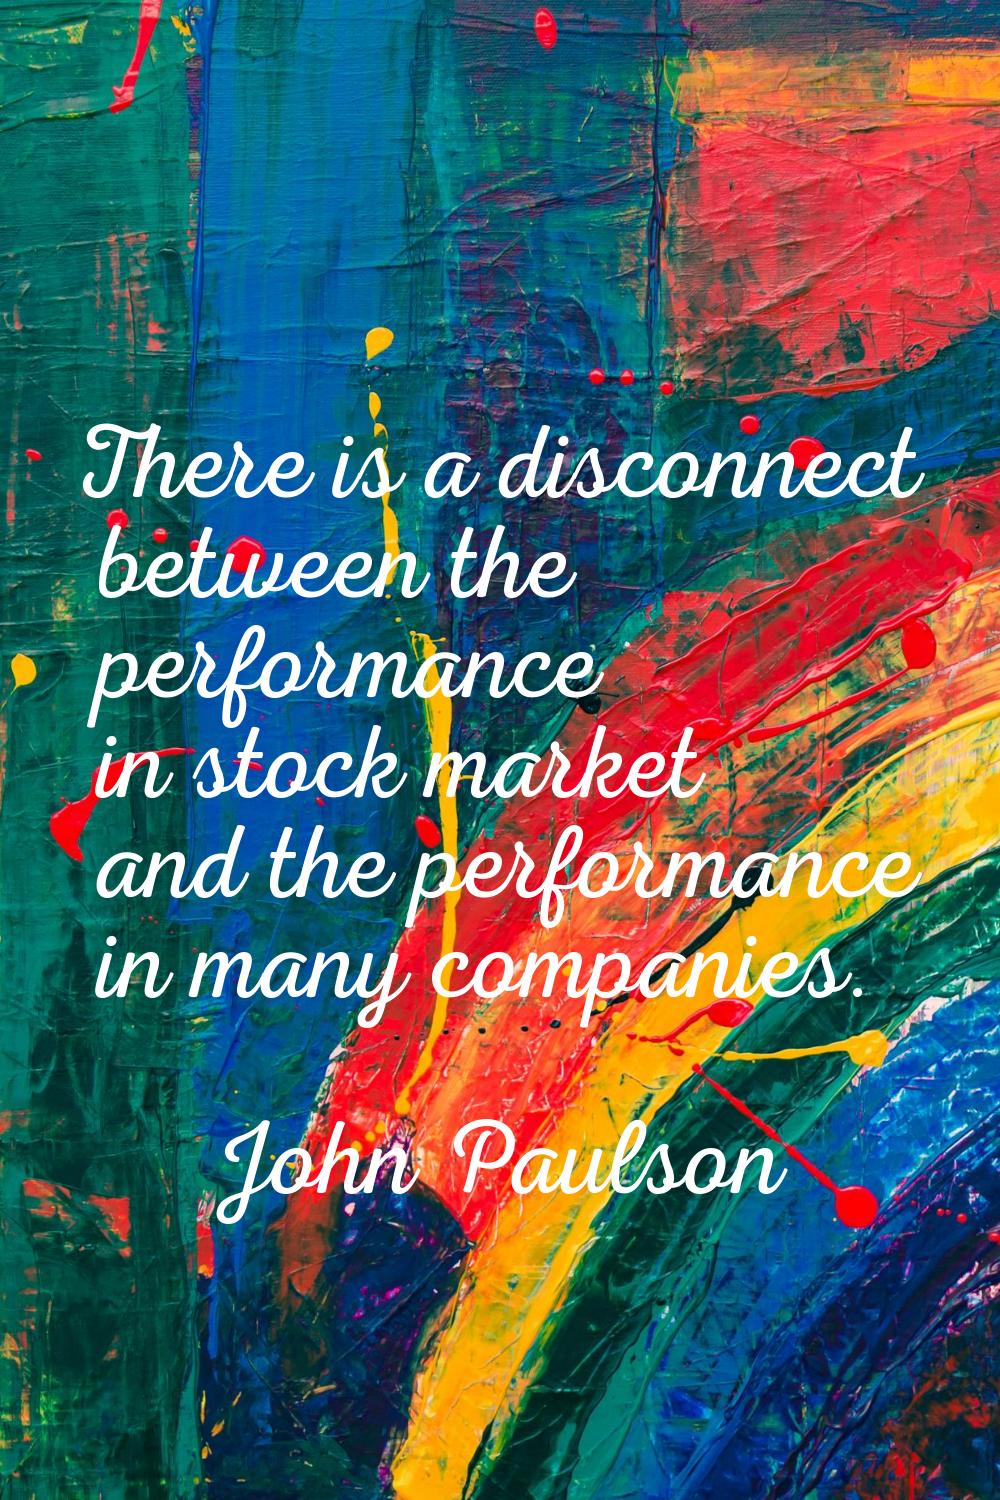 There is a disconnect between the performance in stock market and the performance in many companies